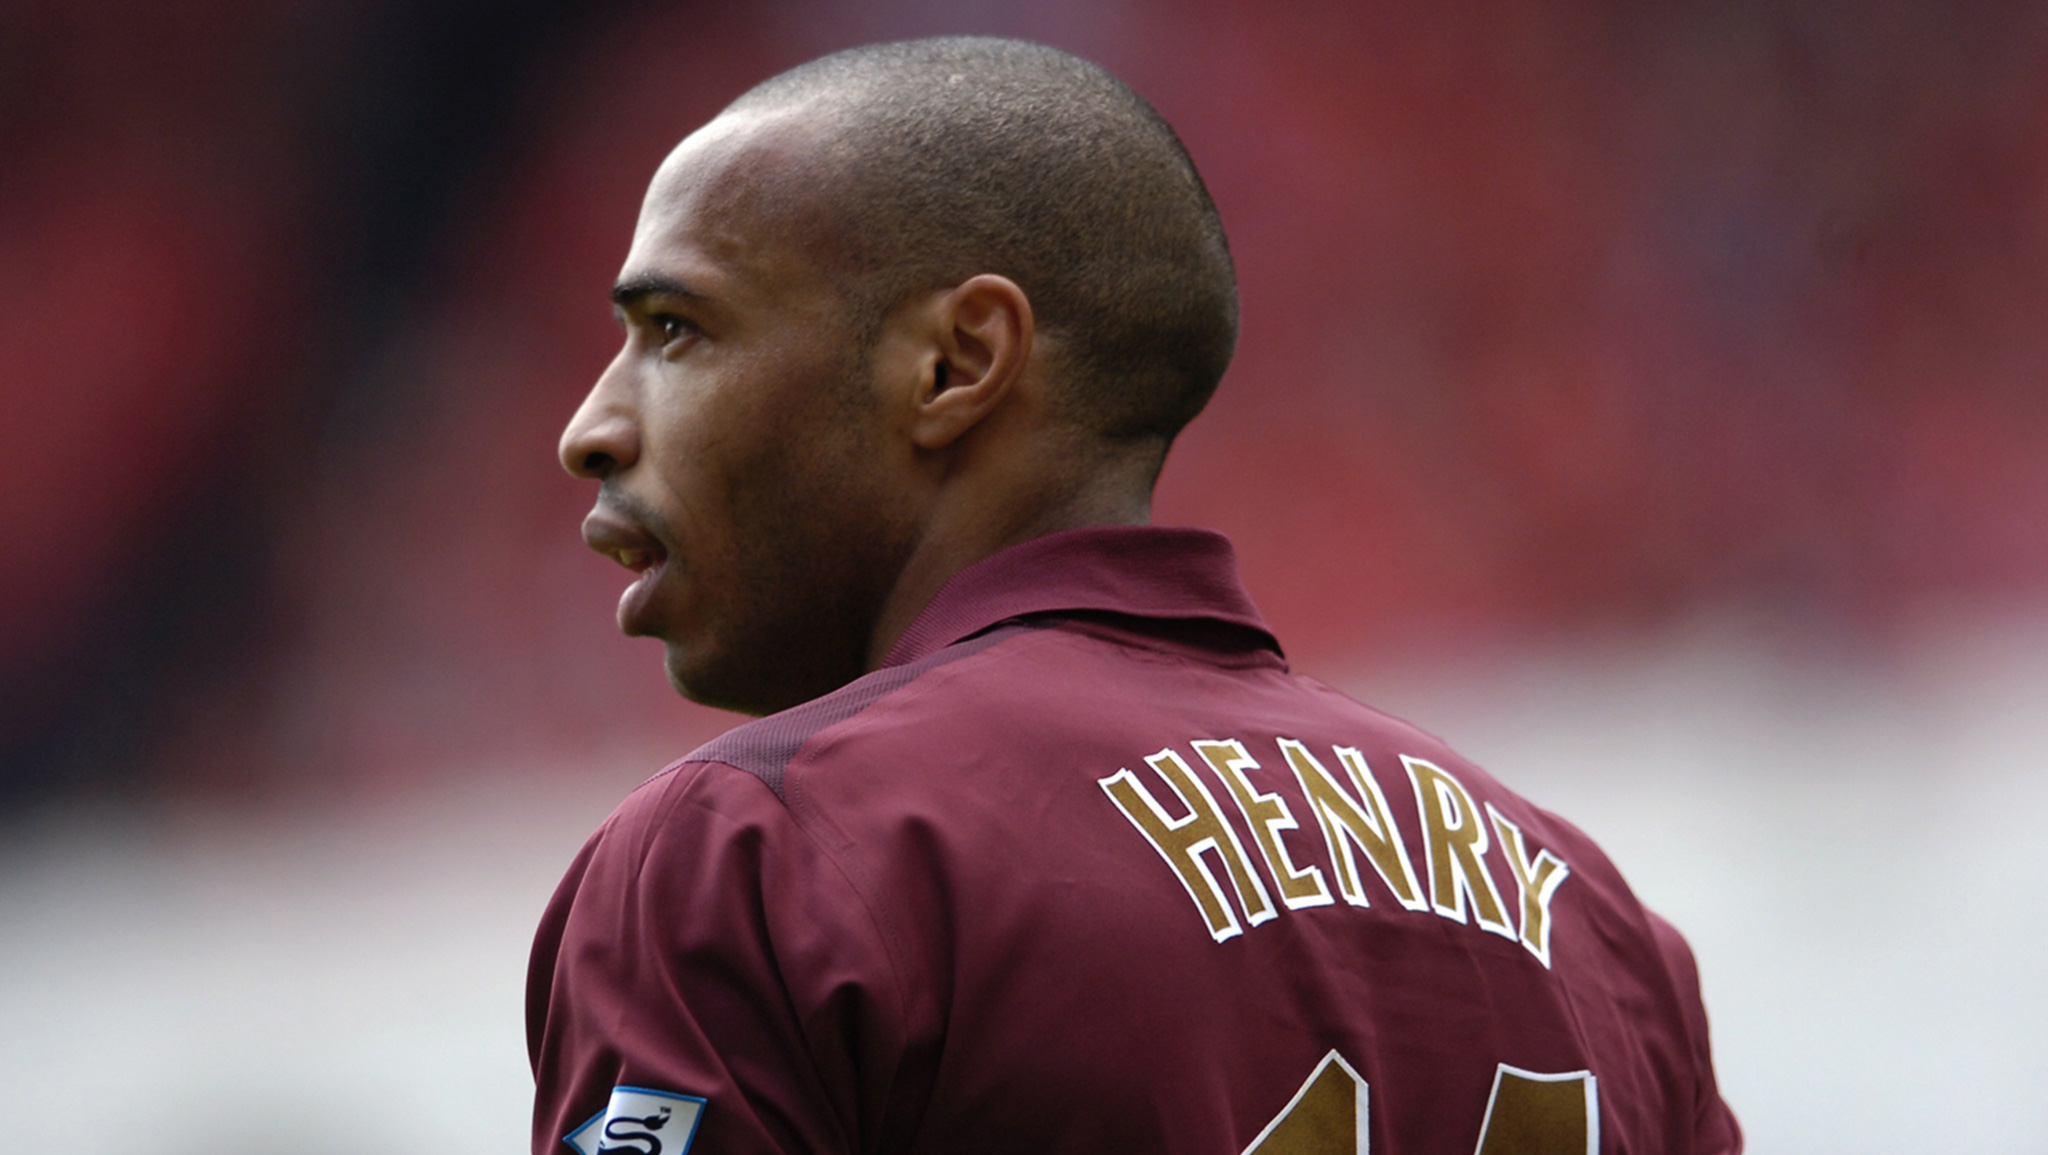 Thierry Henry Porträt